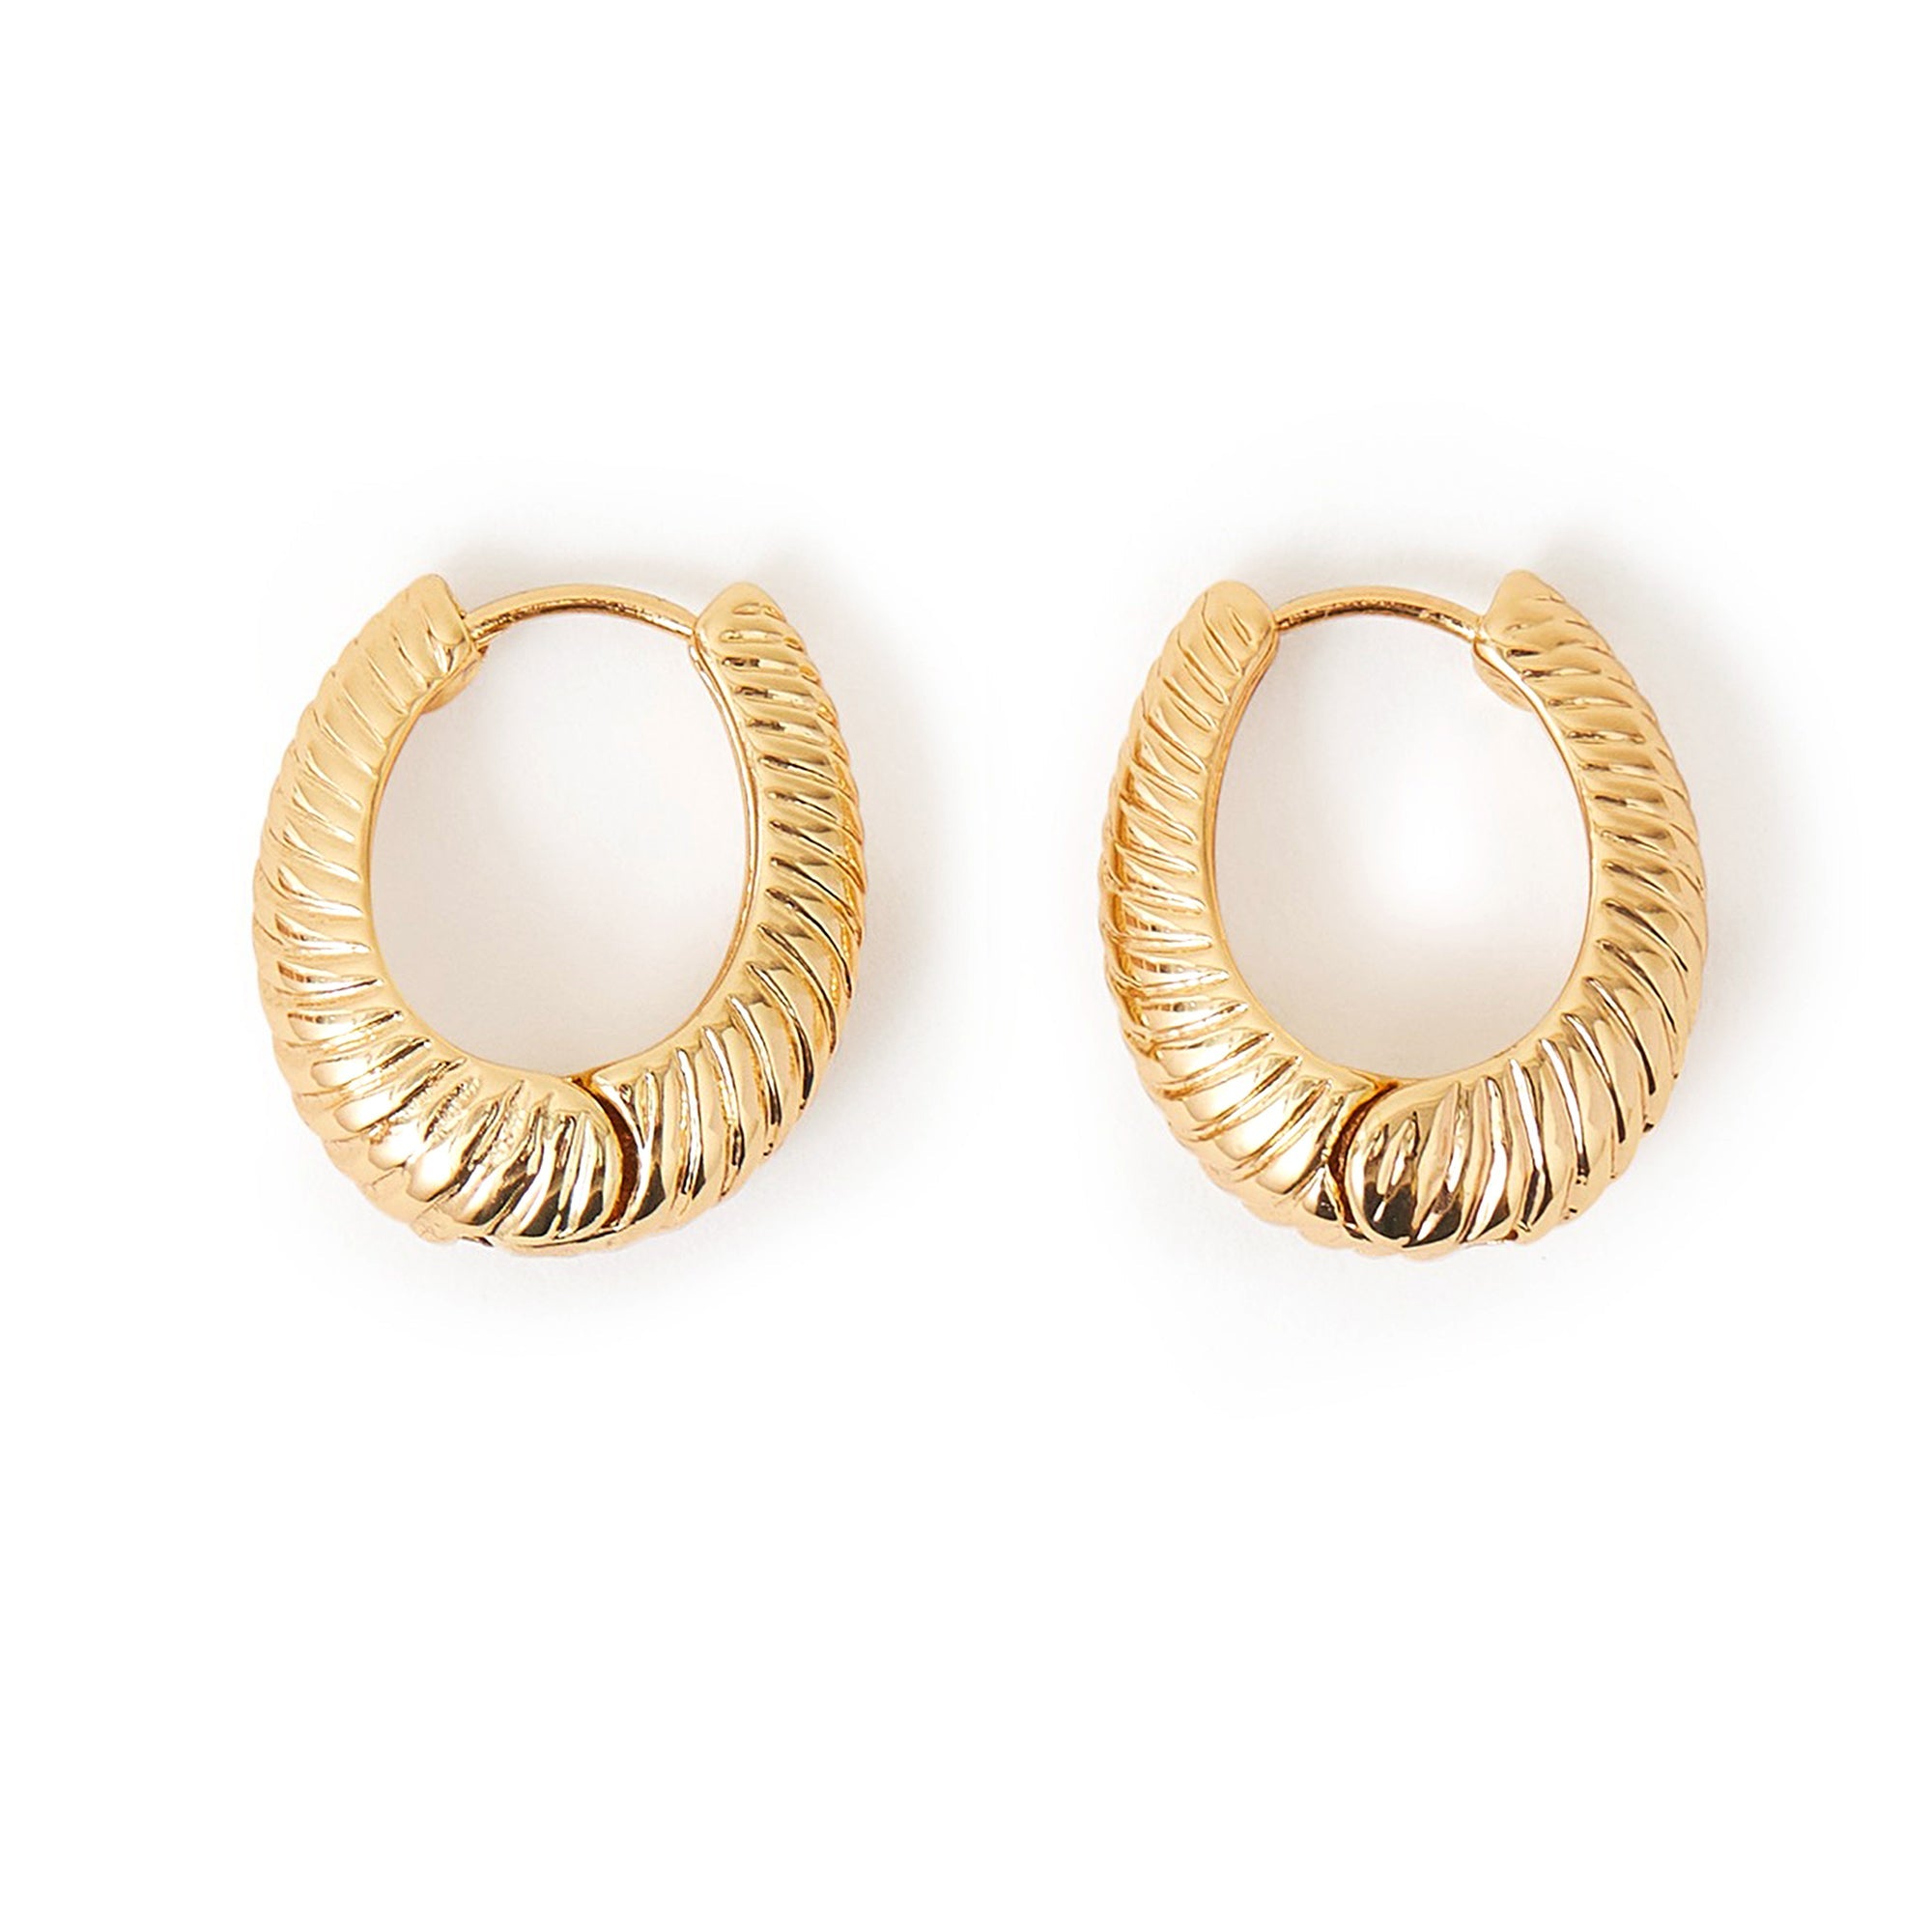 Real Gold Plated Gold Z Creole Hoops Earrings